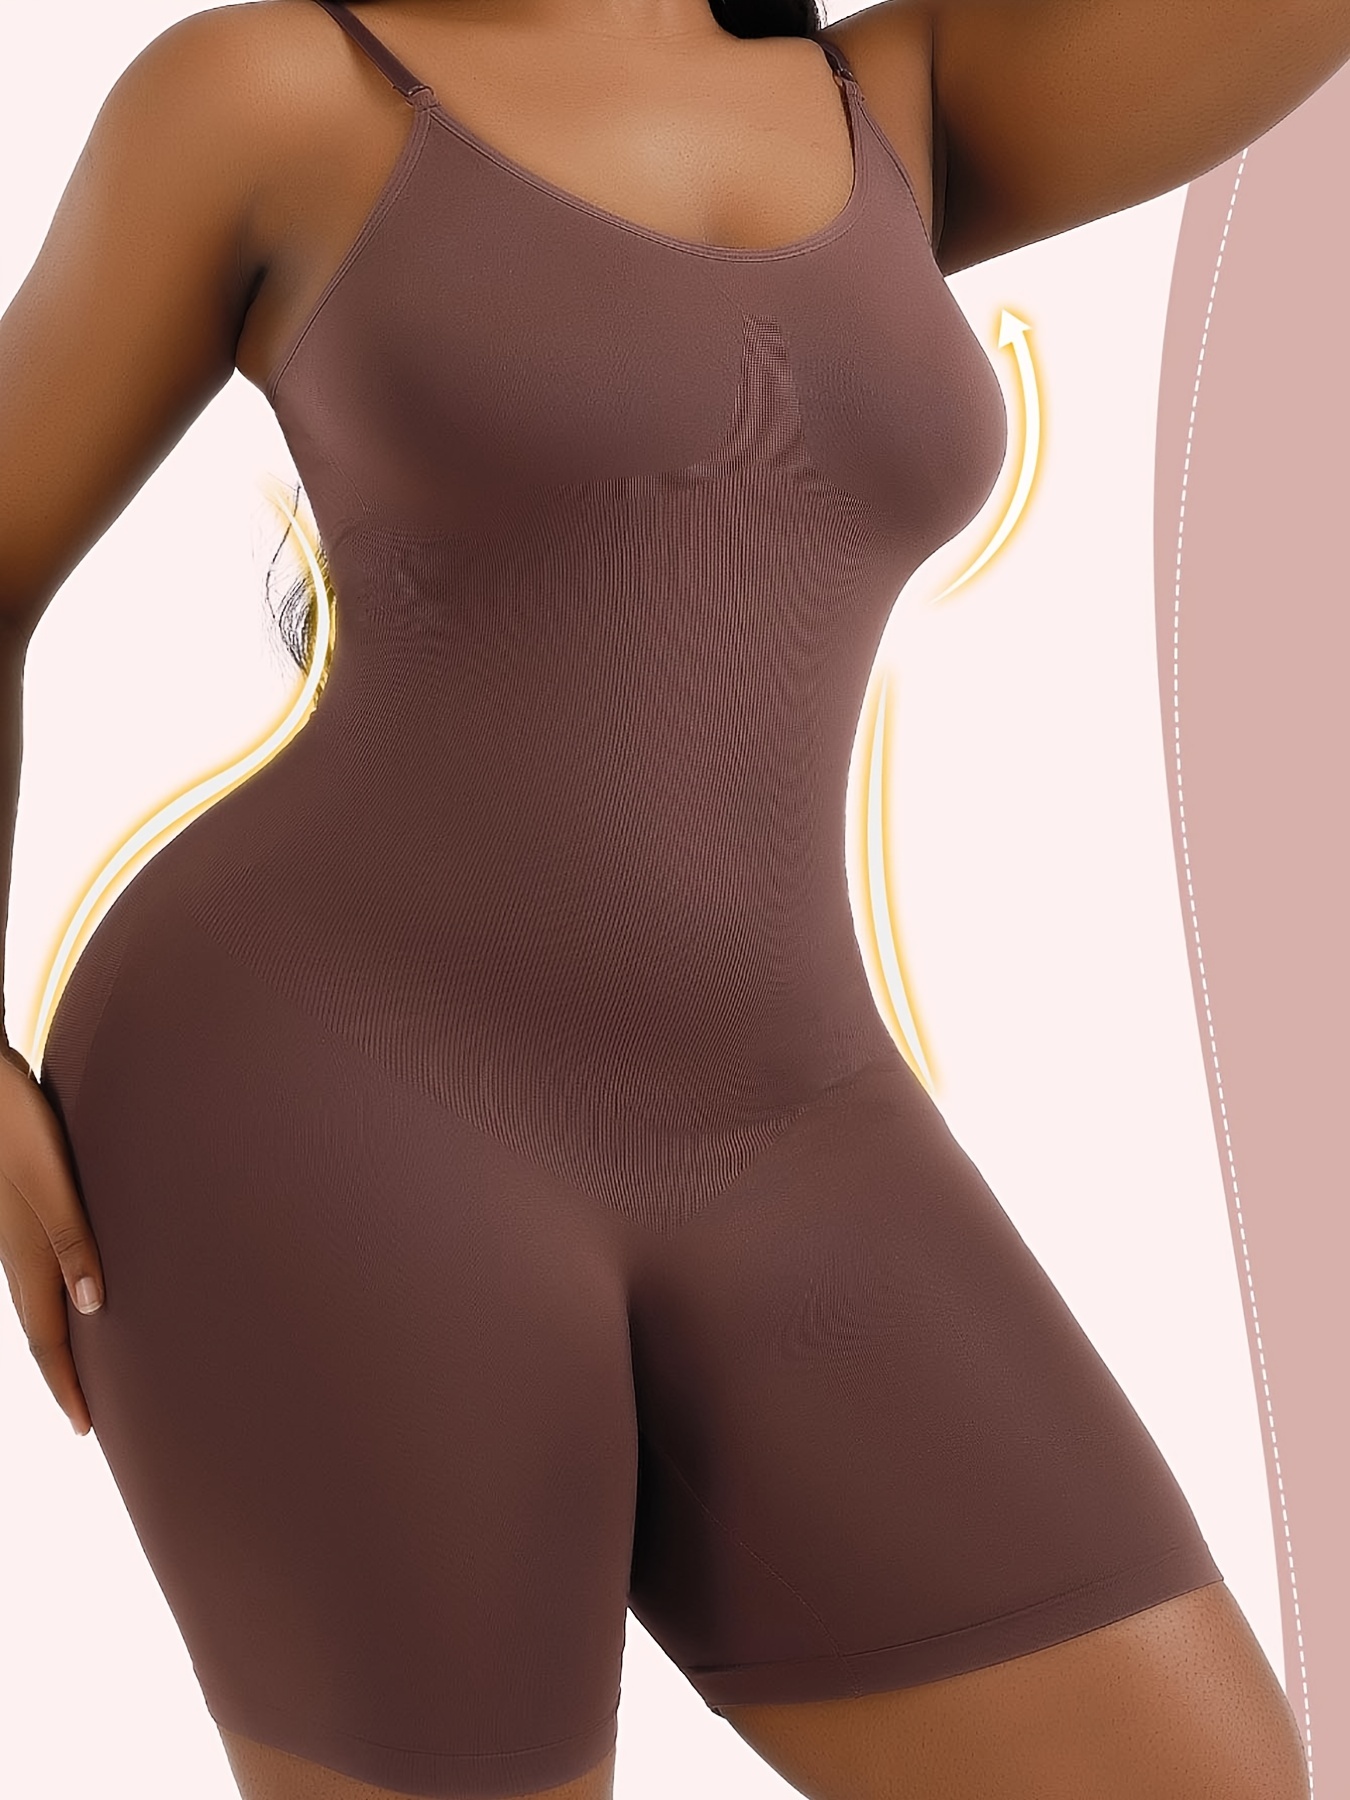 Screened Tops Bodysuit Suspender Hip Lift Seamless Breathable Corset  Bodysuit plus Size Thigh Highs